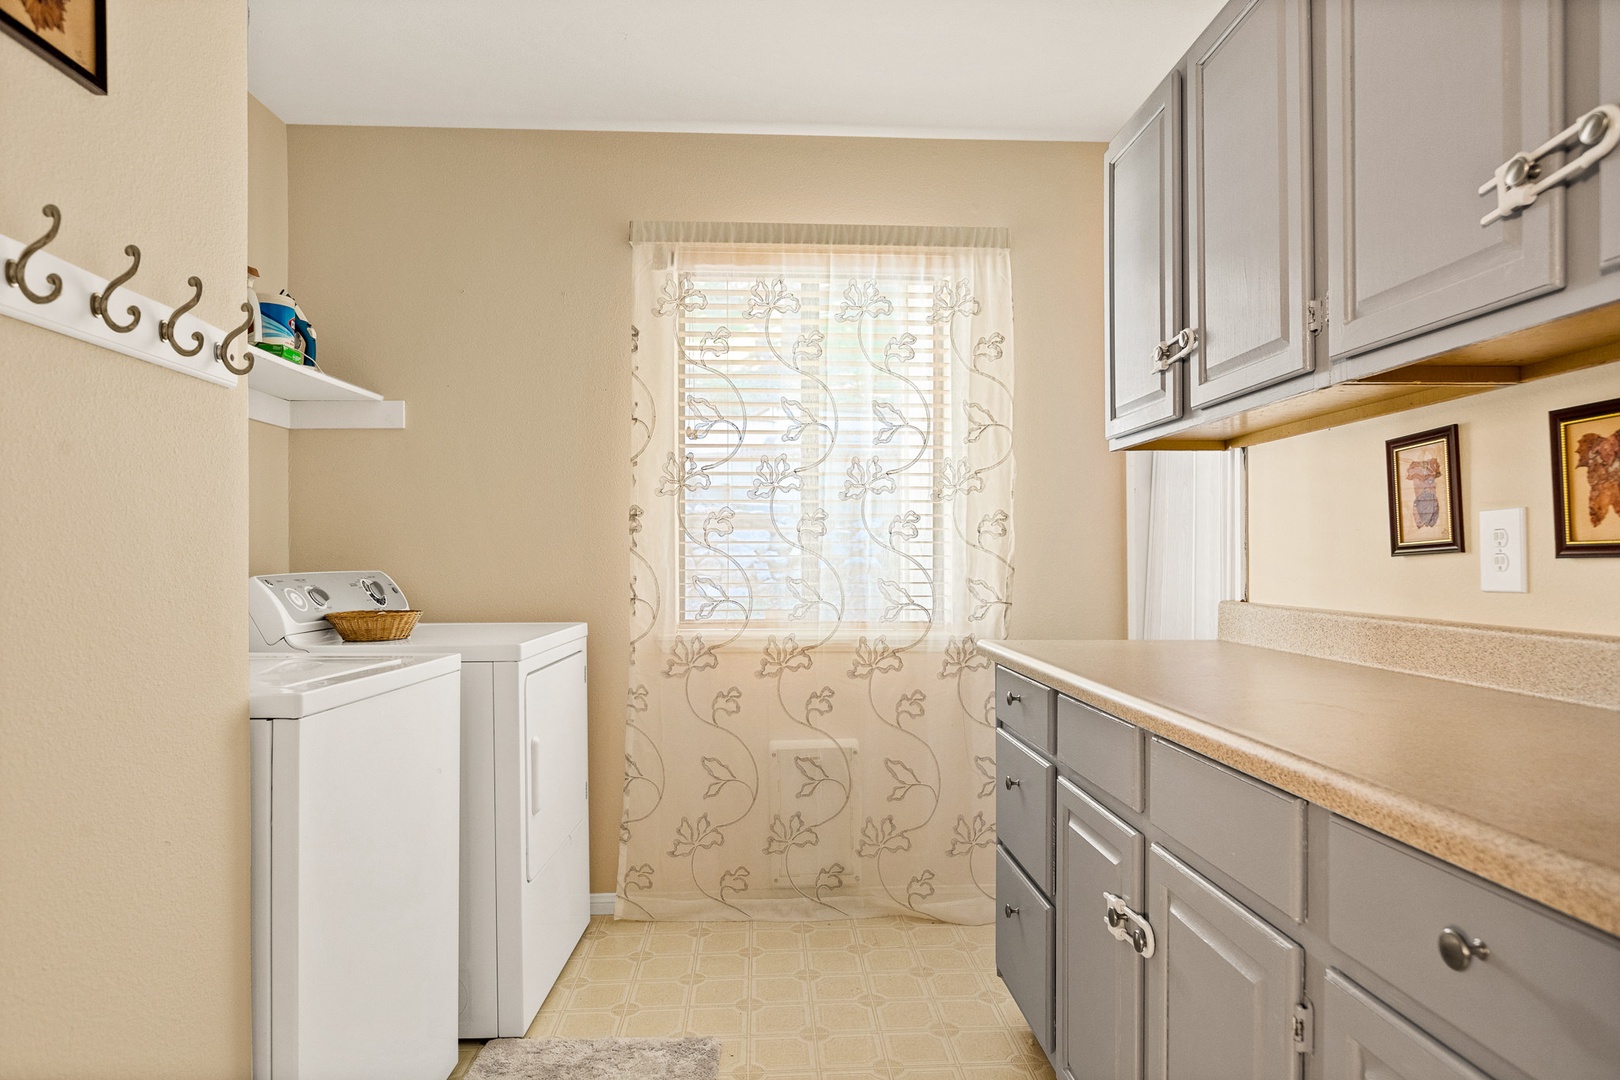 Private laundry is available, located in the downstairs laundry room